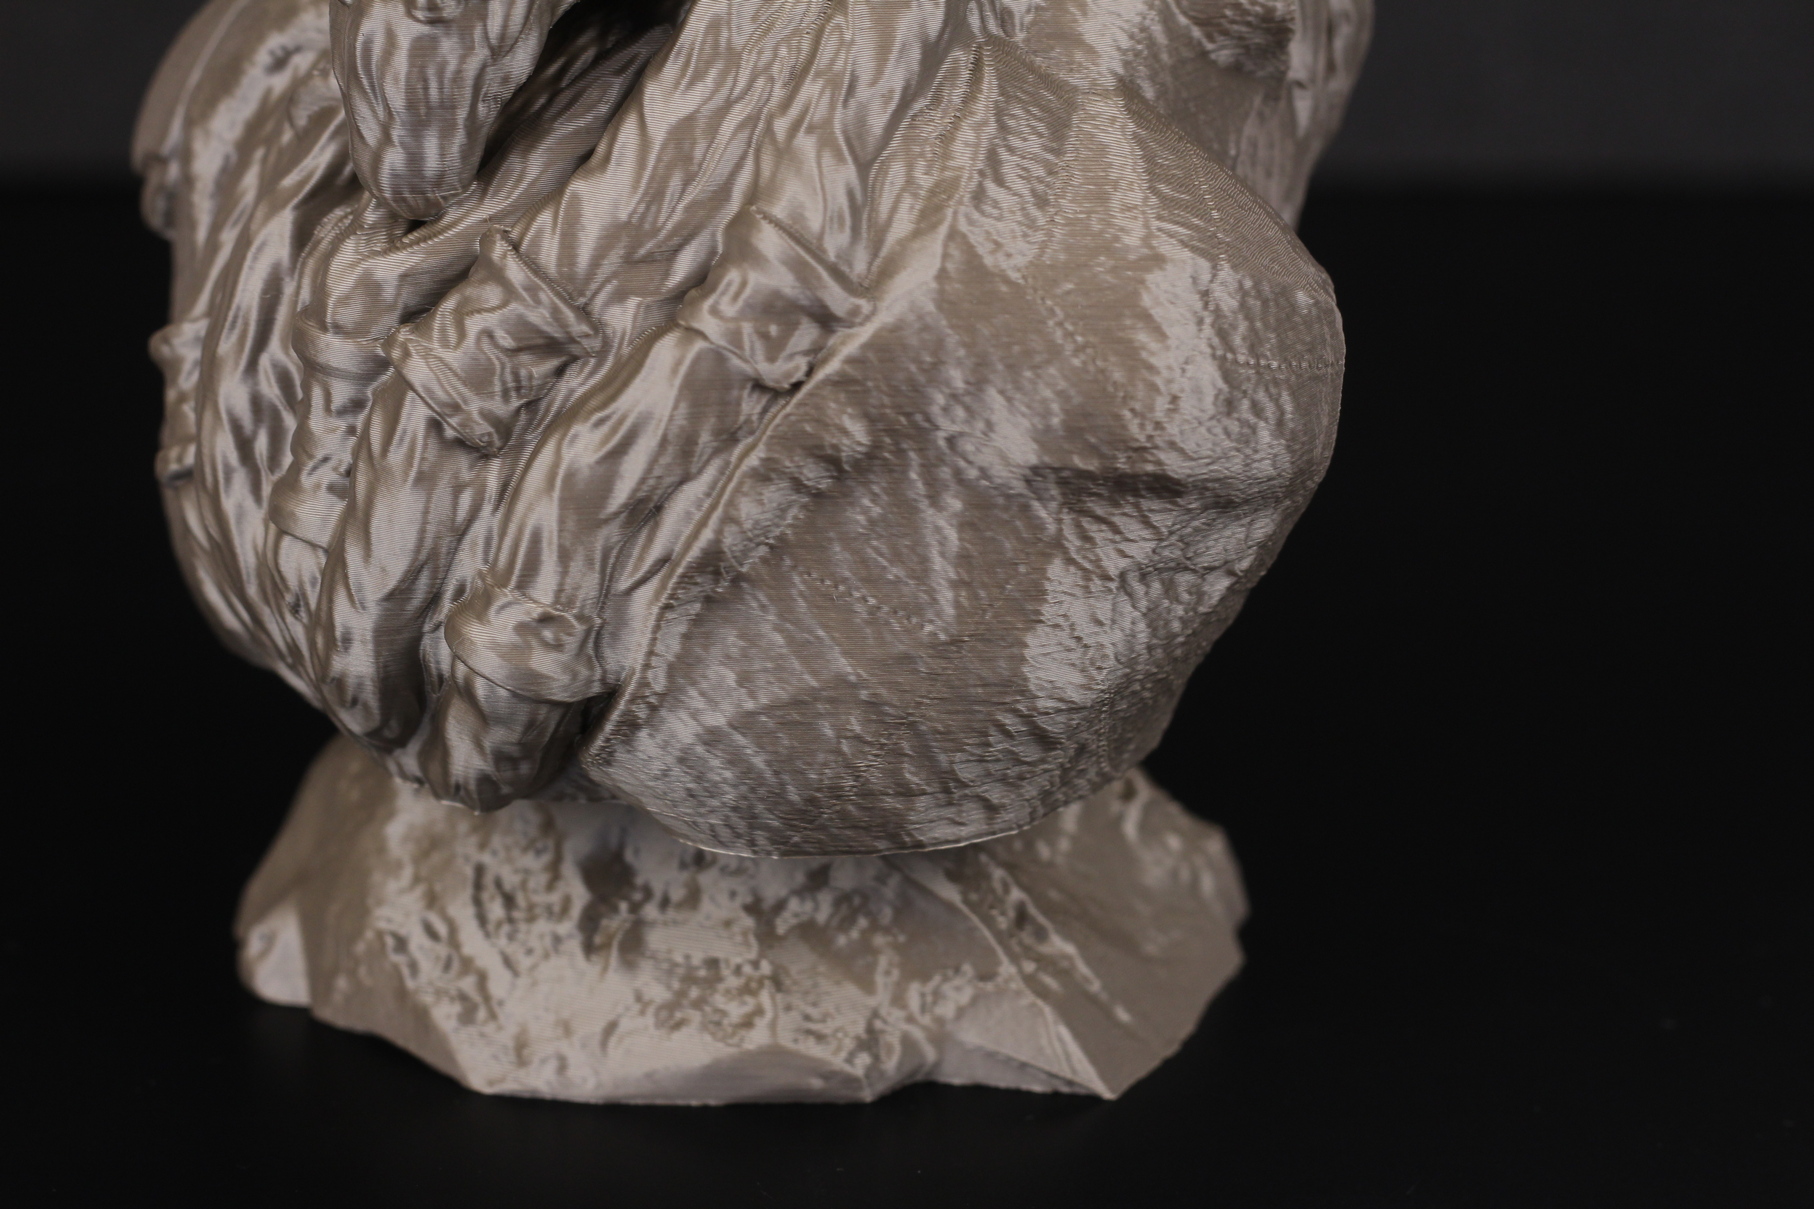 Worgen Bust printed on RatRig V Core 3 4 | RatRig V-Core 3 Review: Premium CoreXY 3D Printer Kit